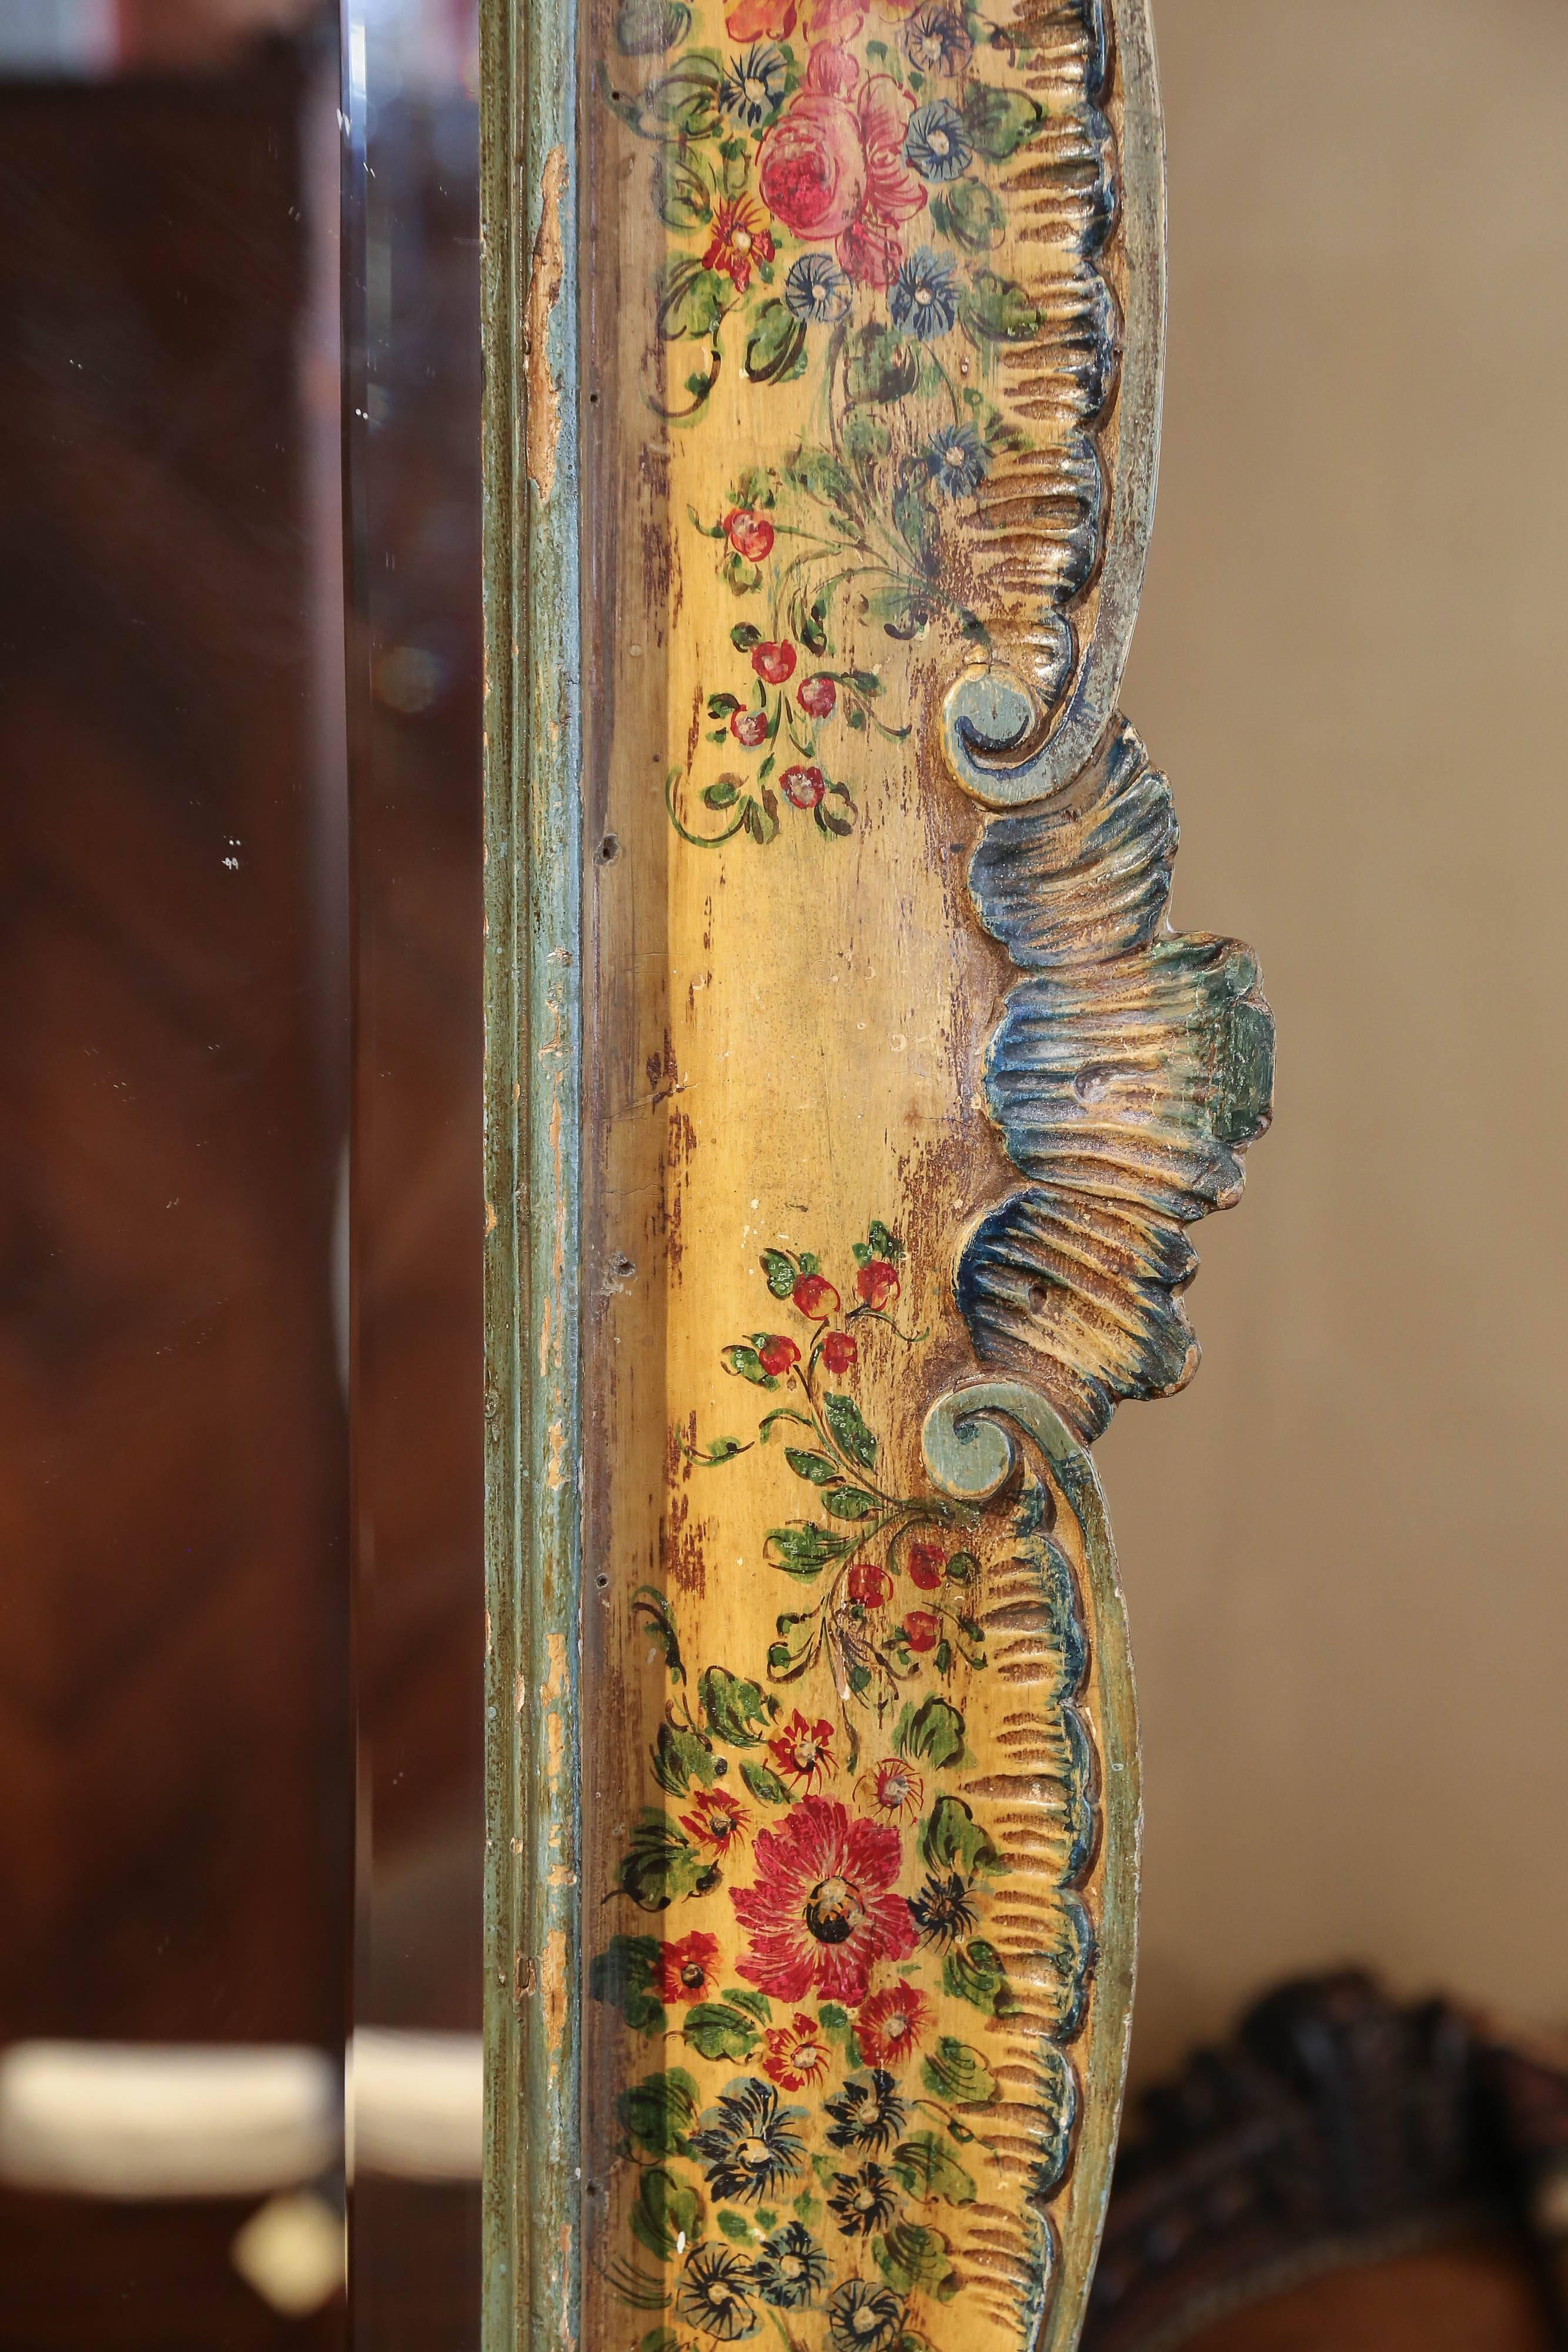 Venetian Hand-Painted Full Length Mirror For Sale at 1stDibs